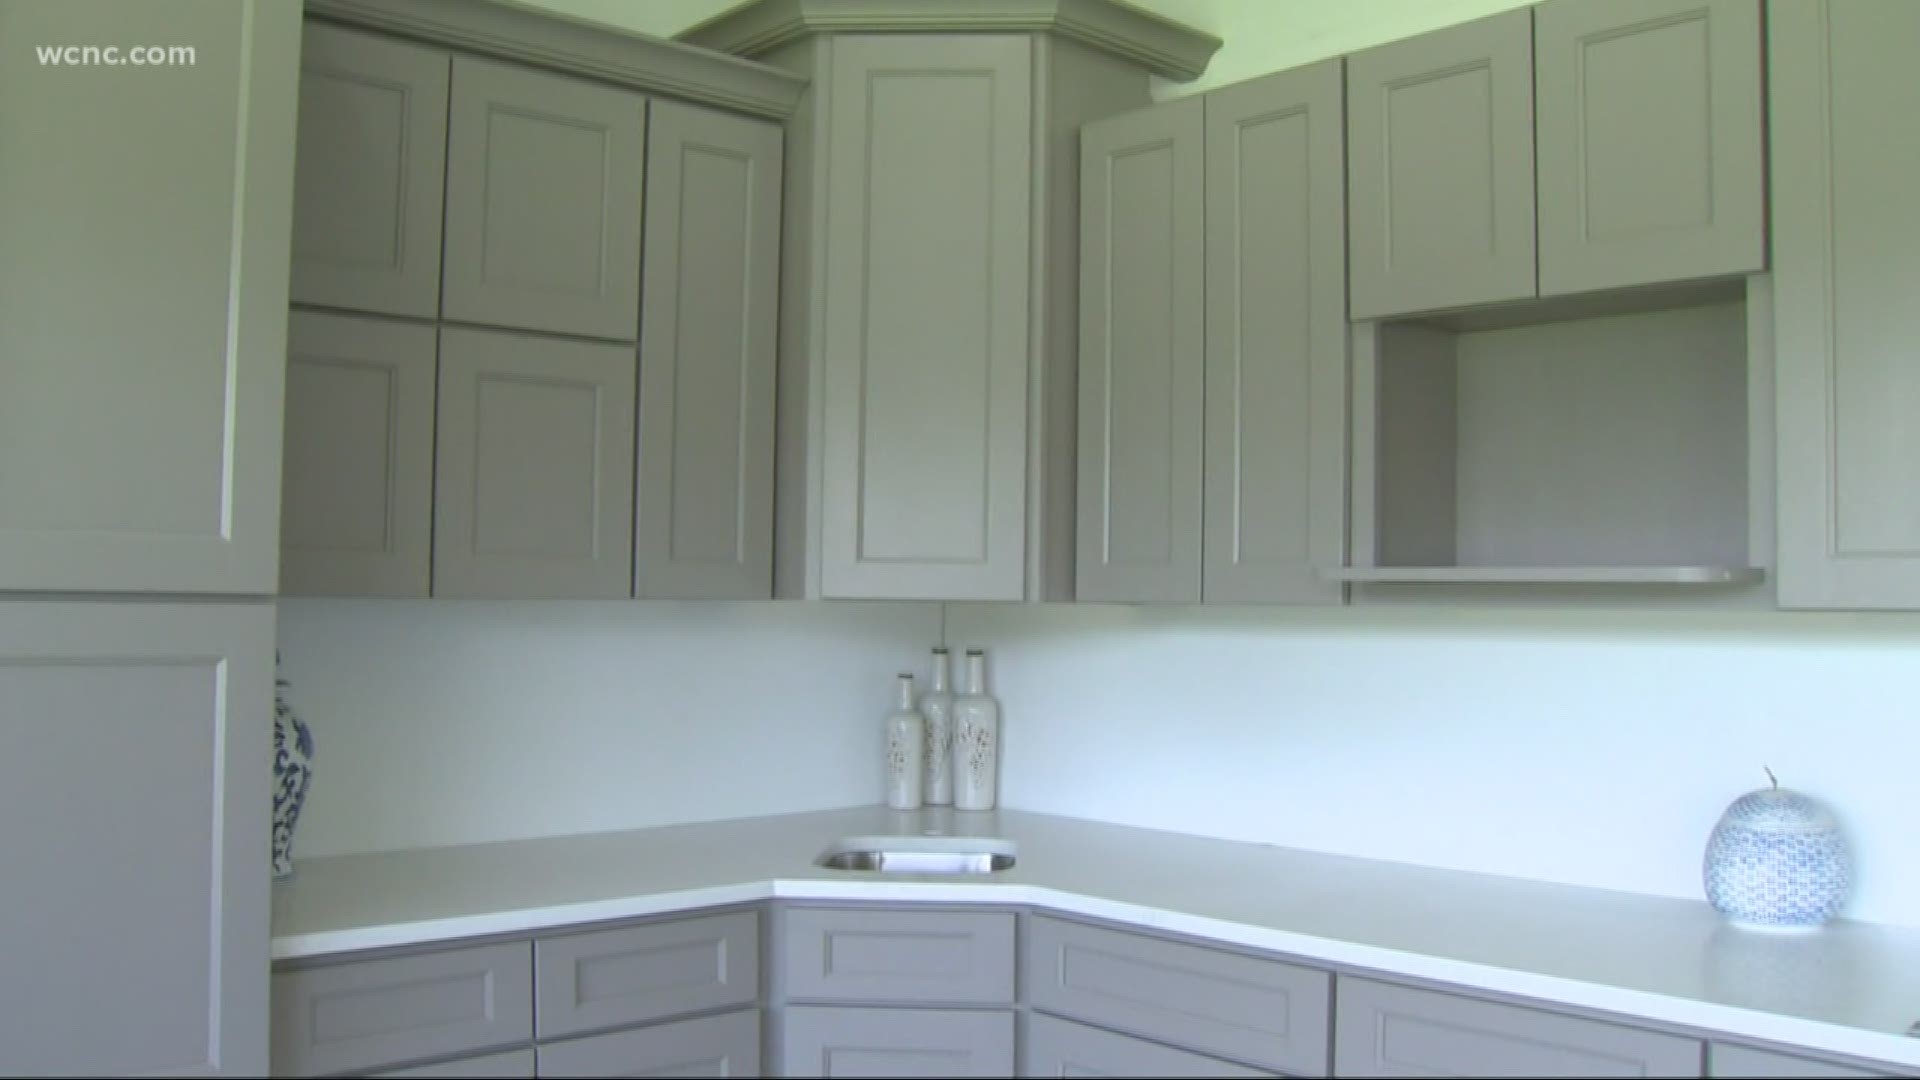 Get the kitchen of your dreams with DL Cabinetry.